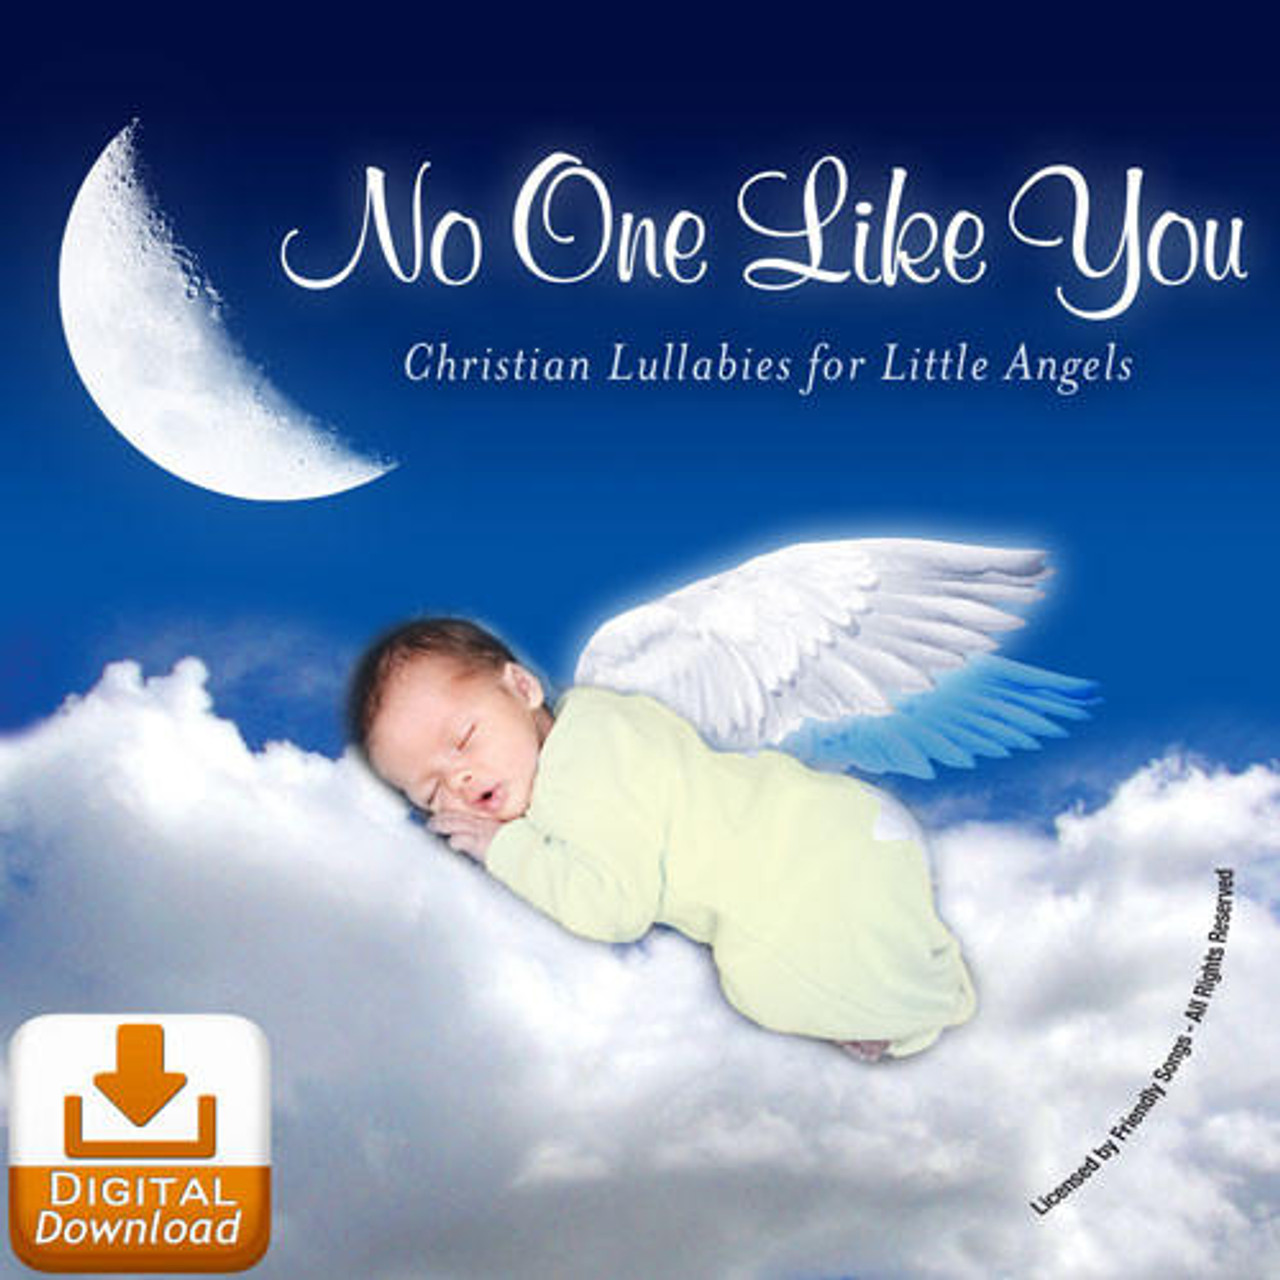 DIGITAL DOWNLOAD - No One Like You Personalized Kids Christian Lullaby  Music Album - Personalized Friendly Songs